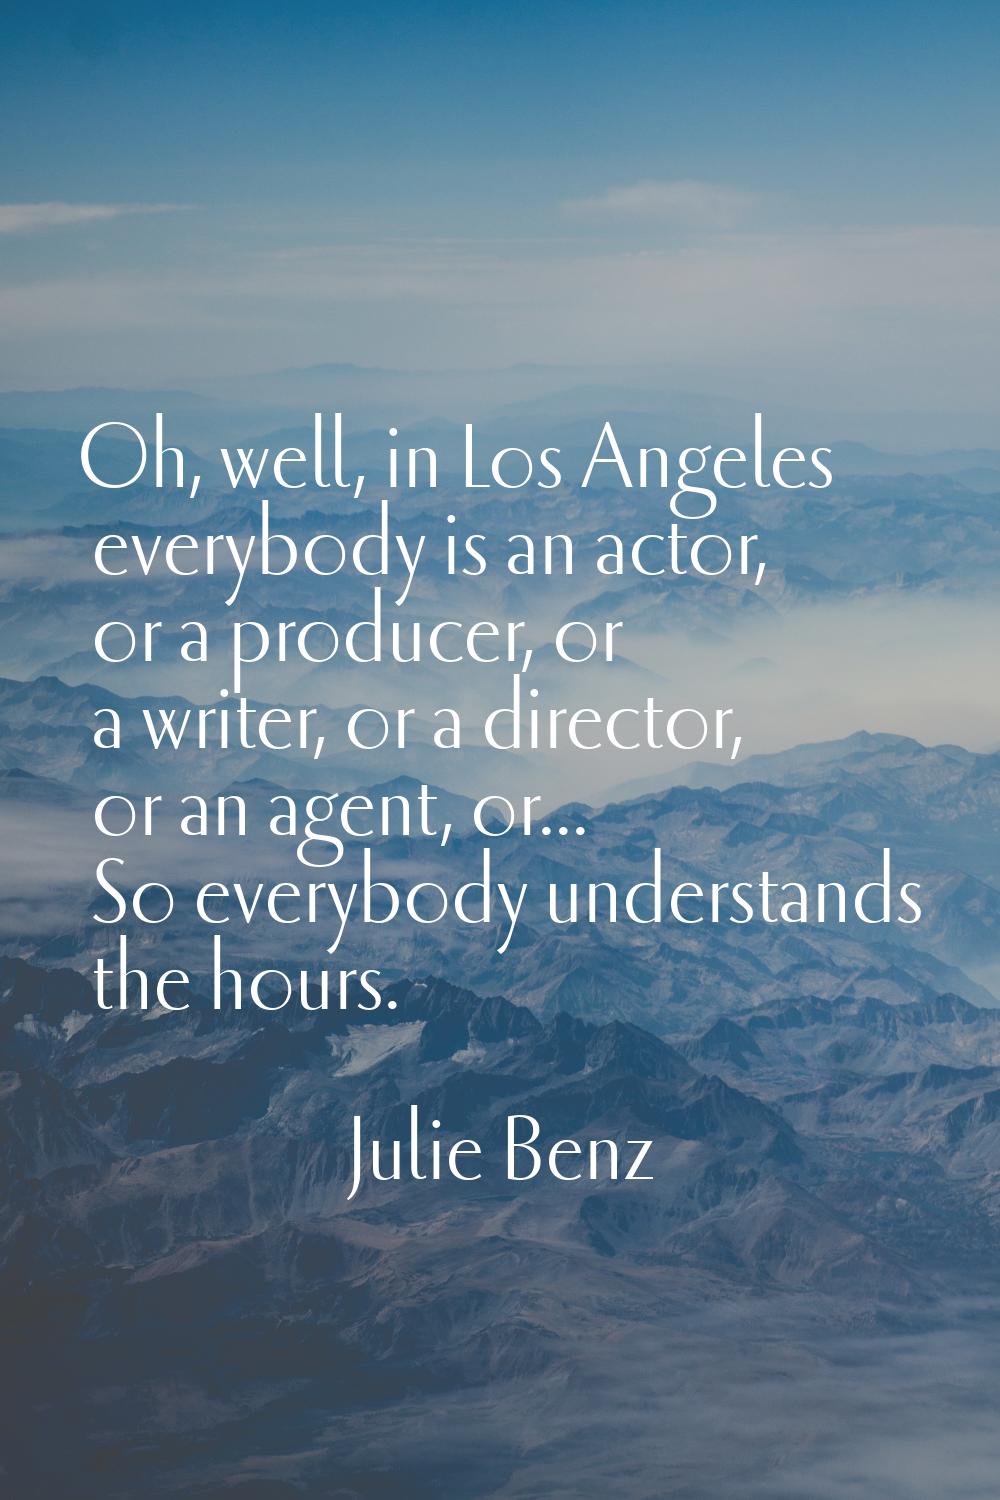 Oh, well, in Los Angeles everybody is an actor, or a producer, or a writer, or a director, or an ag